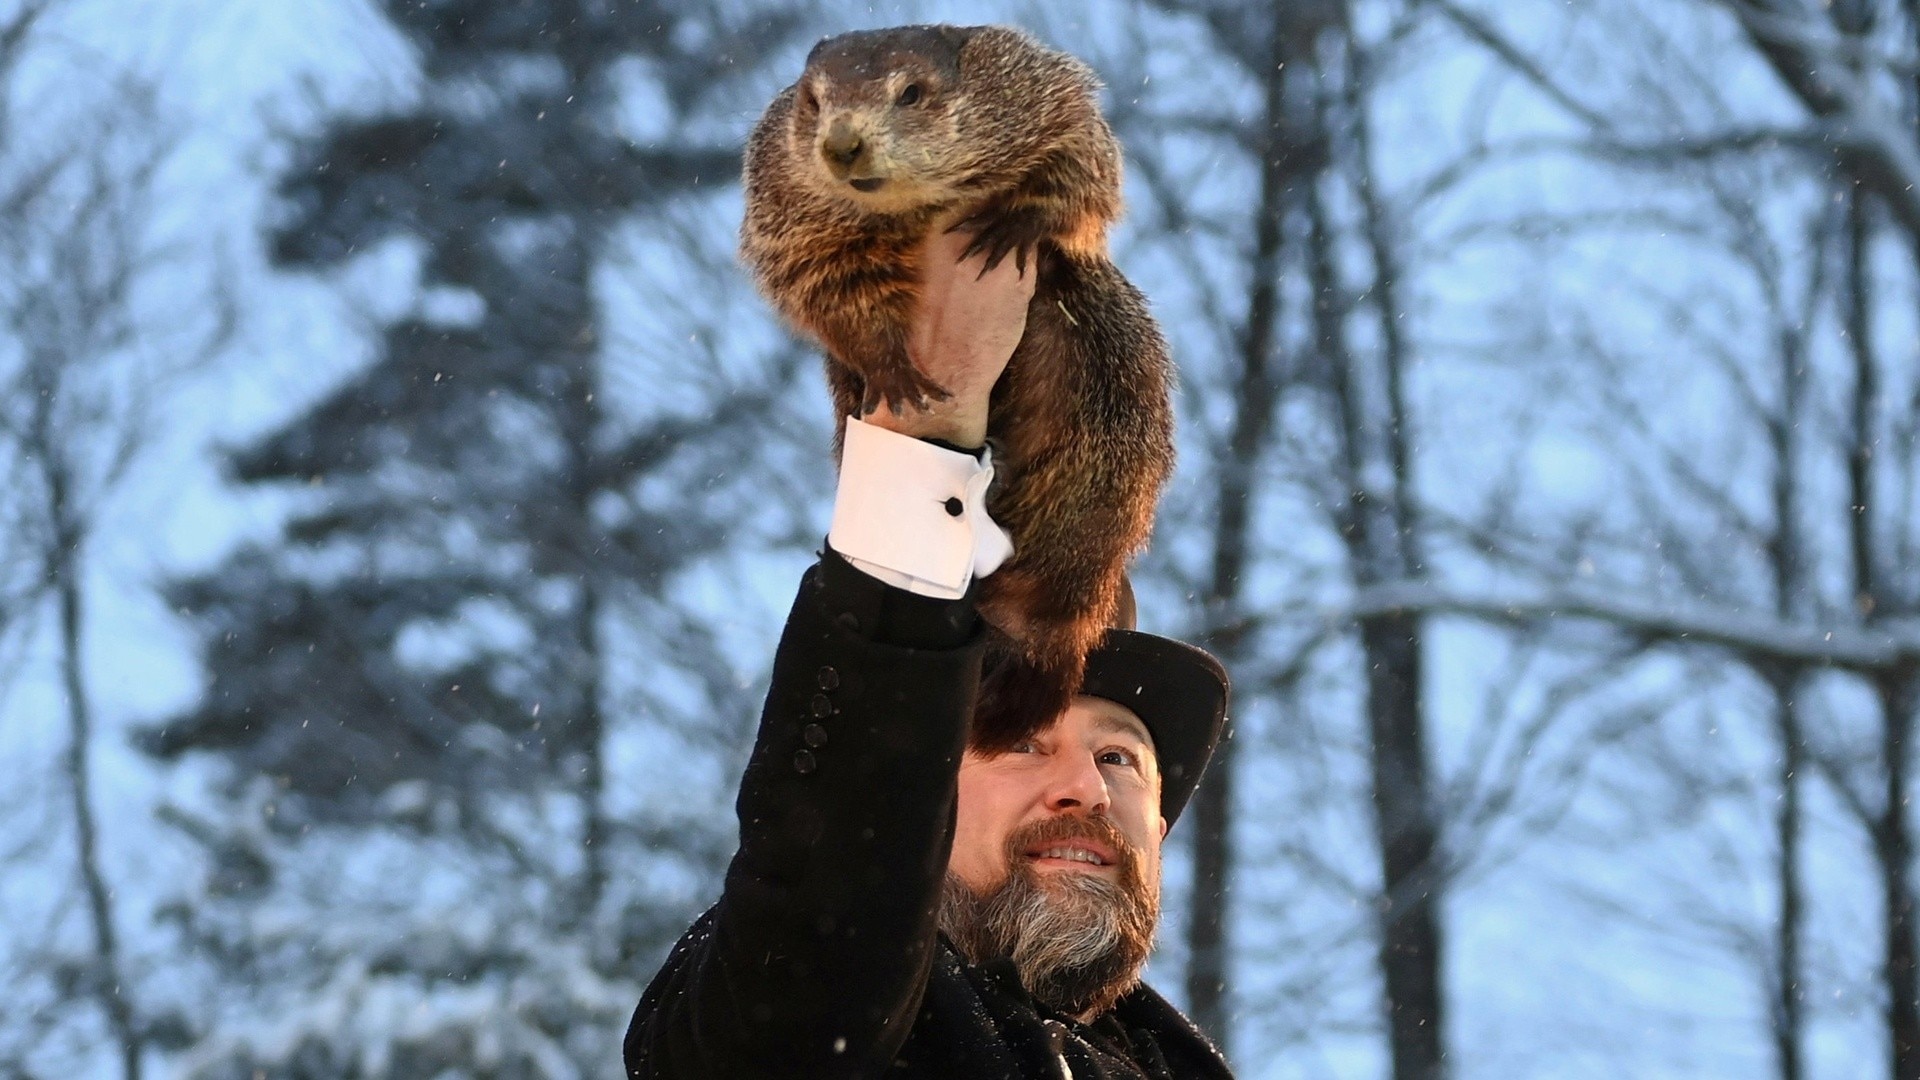 Watch TODAY Excerpt Groundhog Day 2023 Punxsutawney Phil makes his